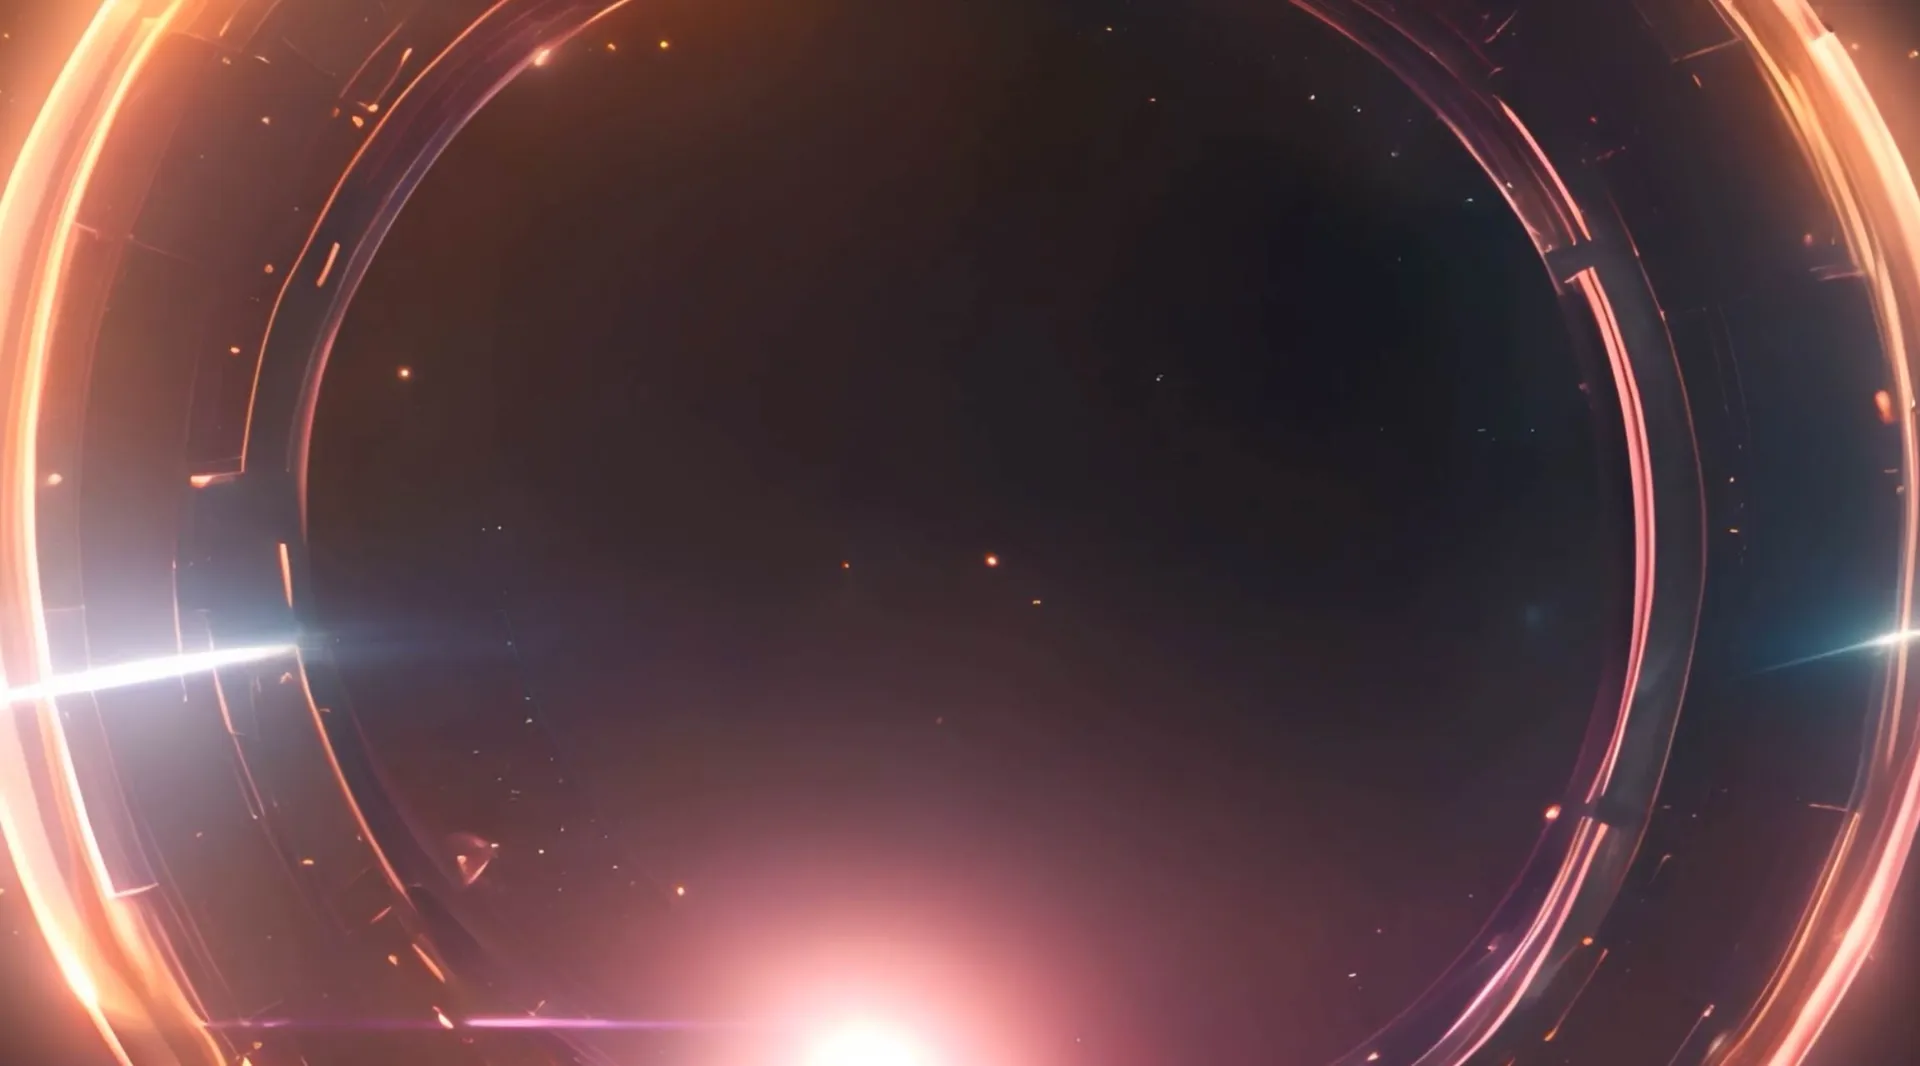 Dazzling Light Spectacle in Space Animation Video